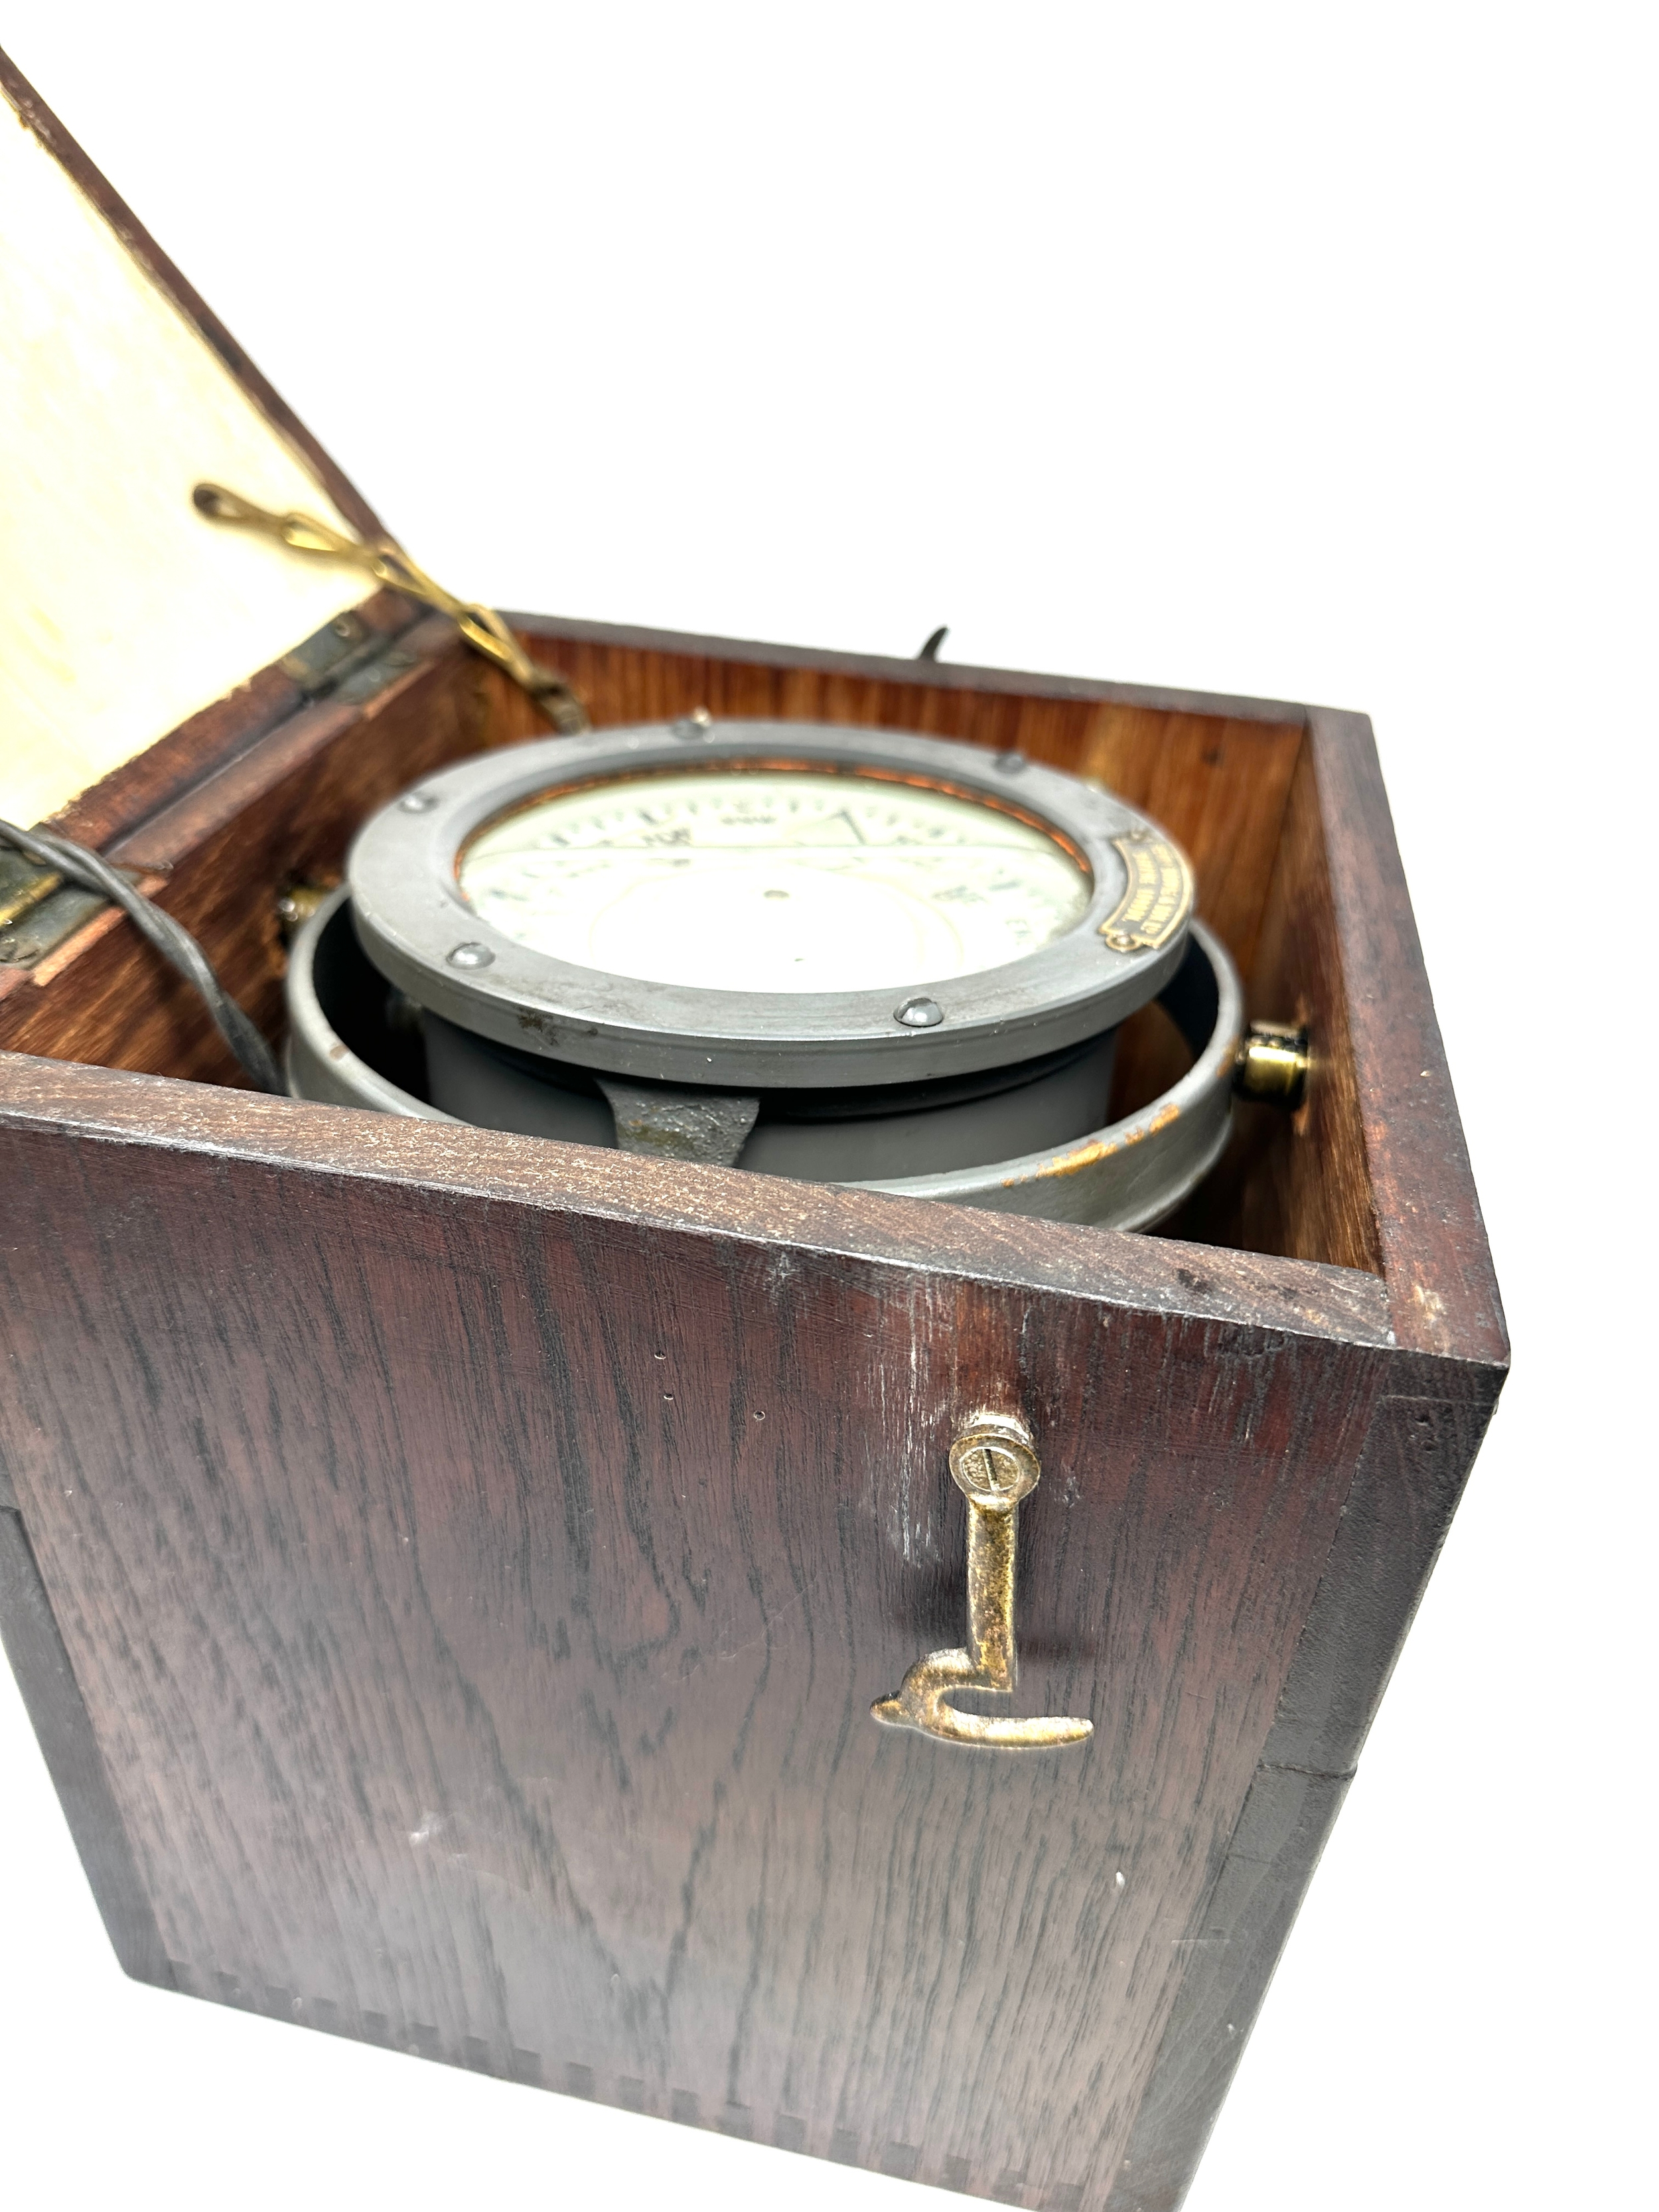 Henry Browne & Sons sestrel marine Ship Compass no b3/3013l in wooden case - Image 4 of 6